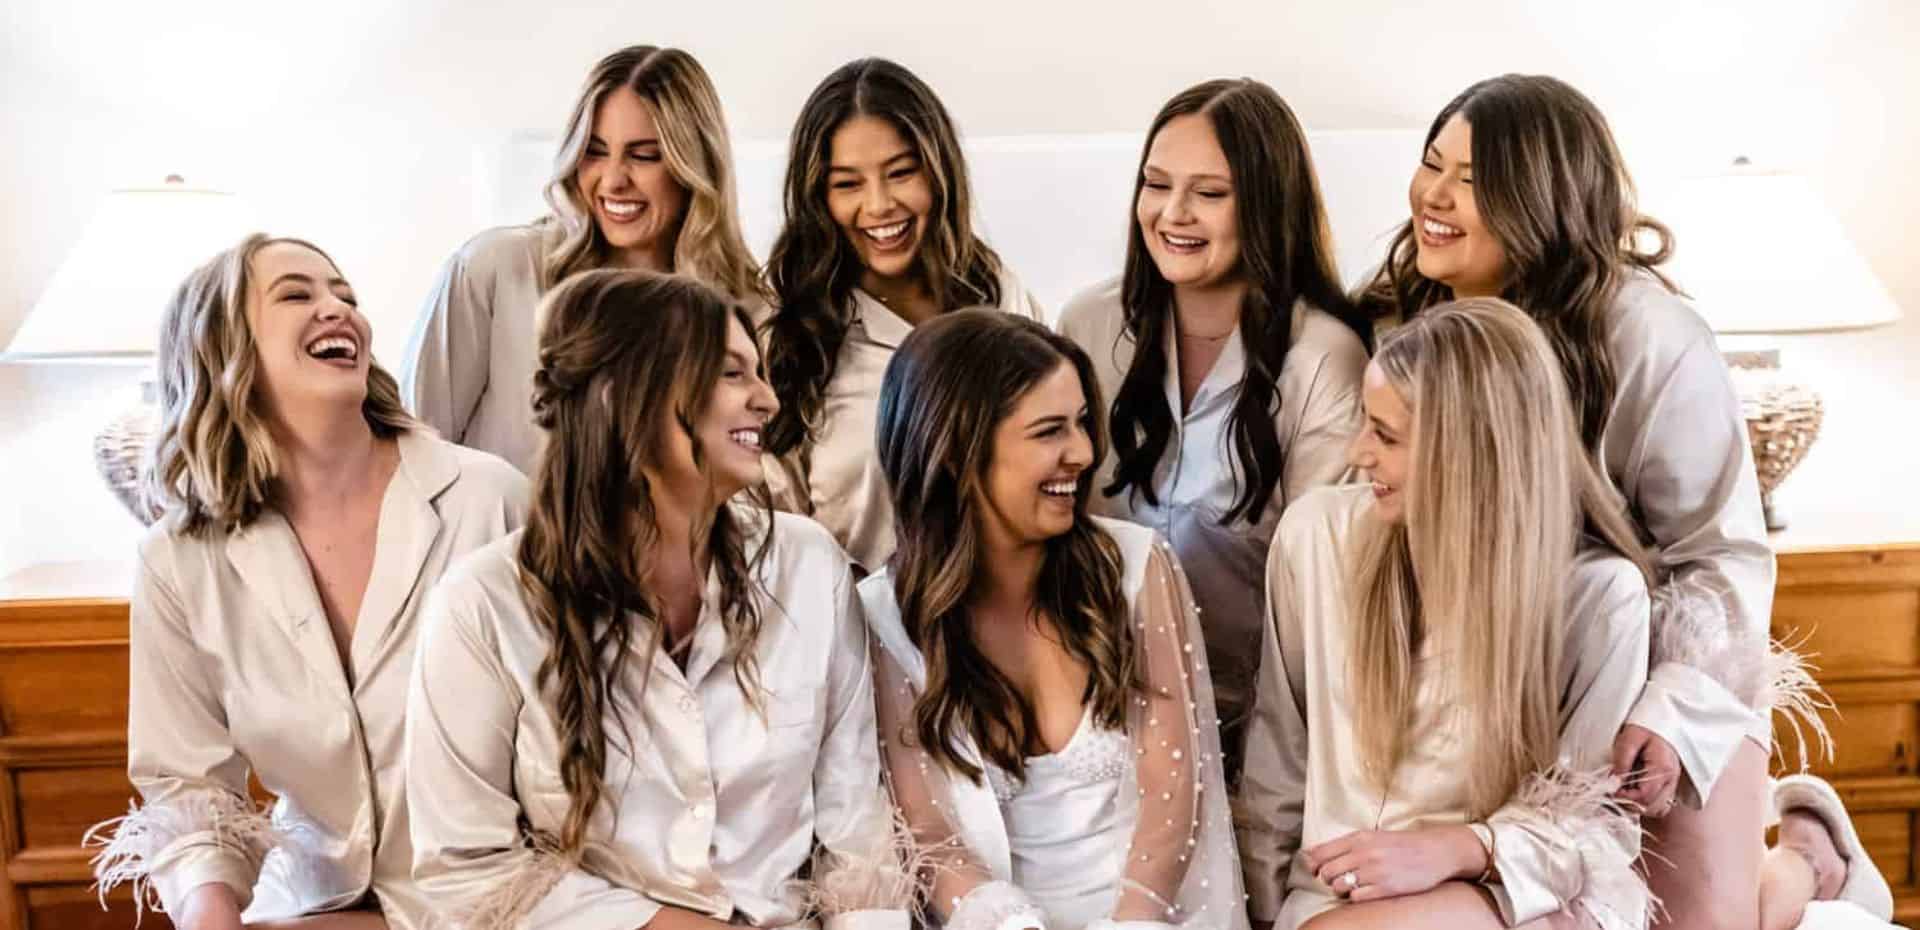 A group of bridesmaids laughing in their robes.